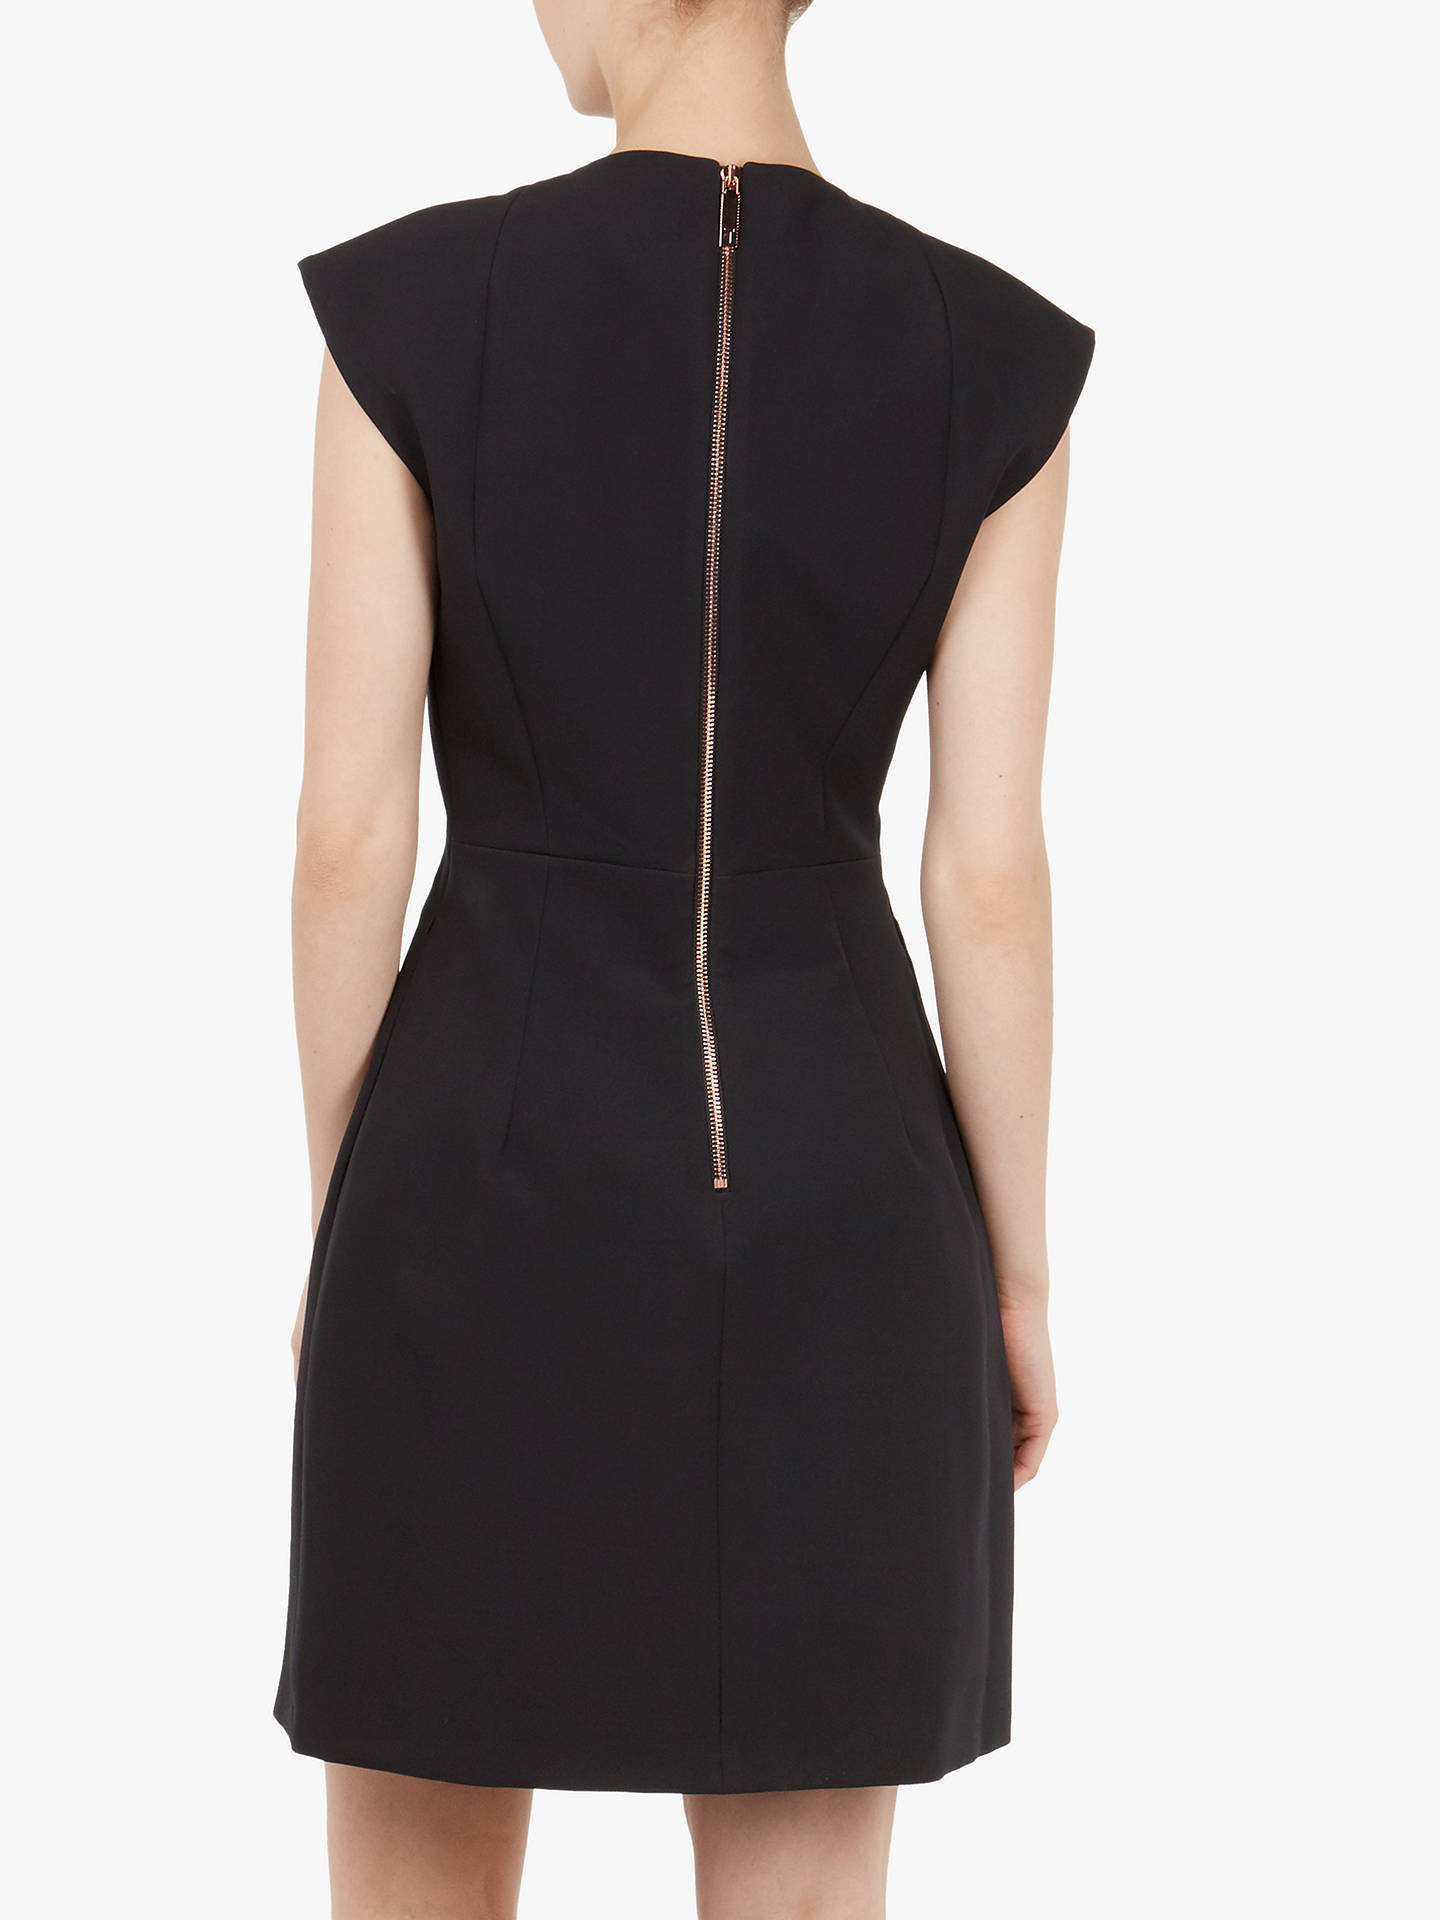 Ted Baker Cap Sleeved Structured Bow Dress, Black at John Lewis & Partners